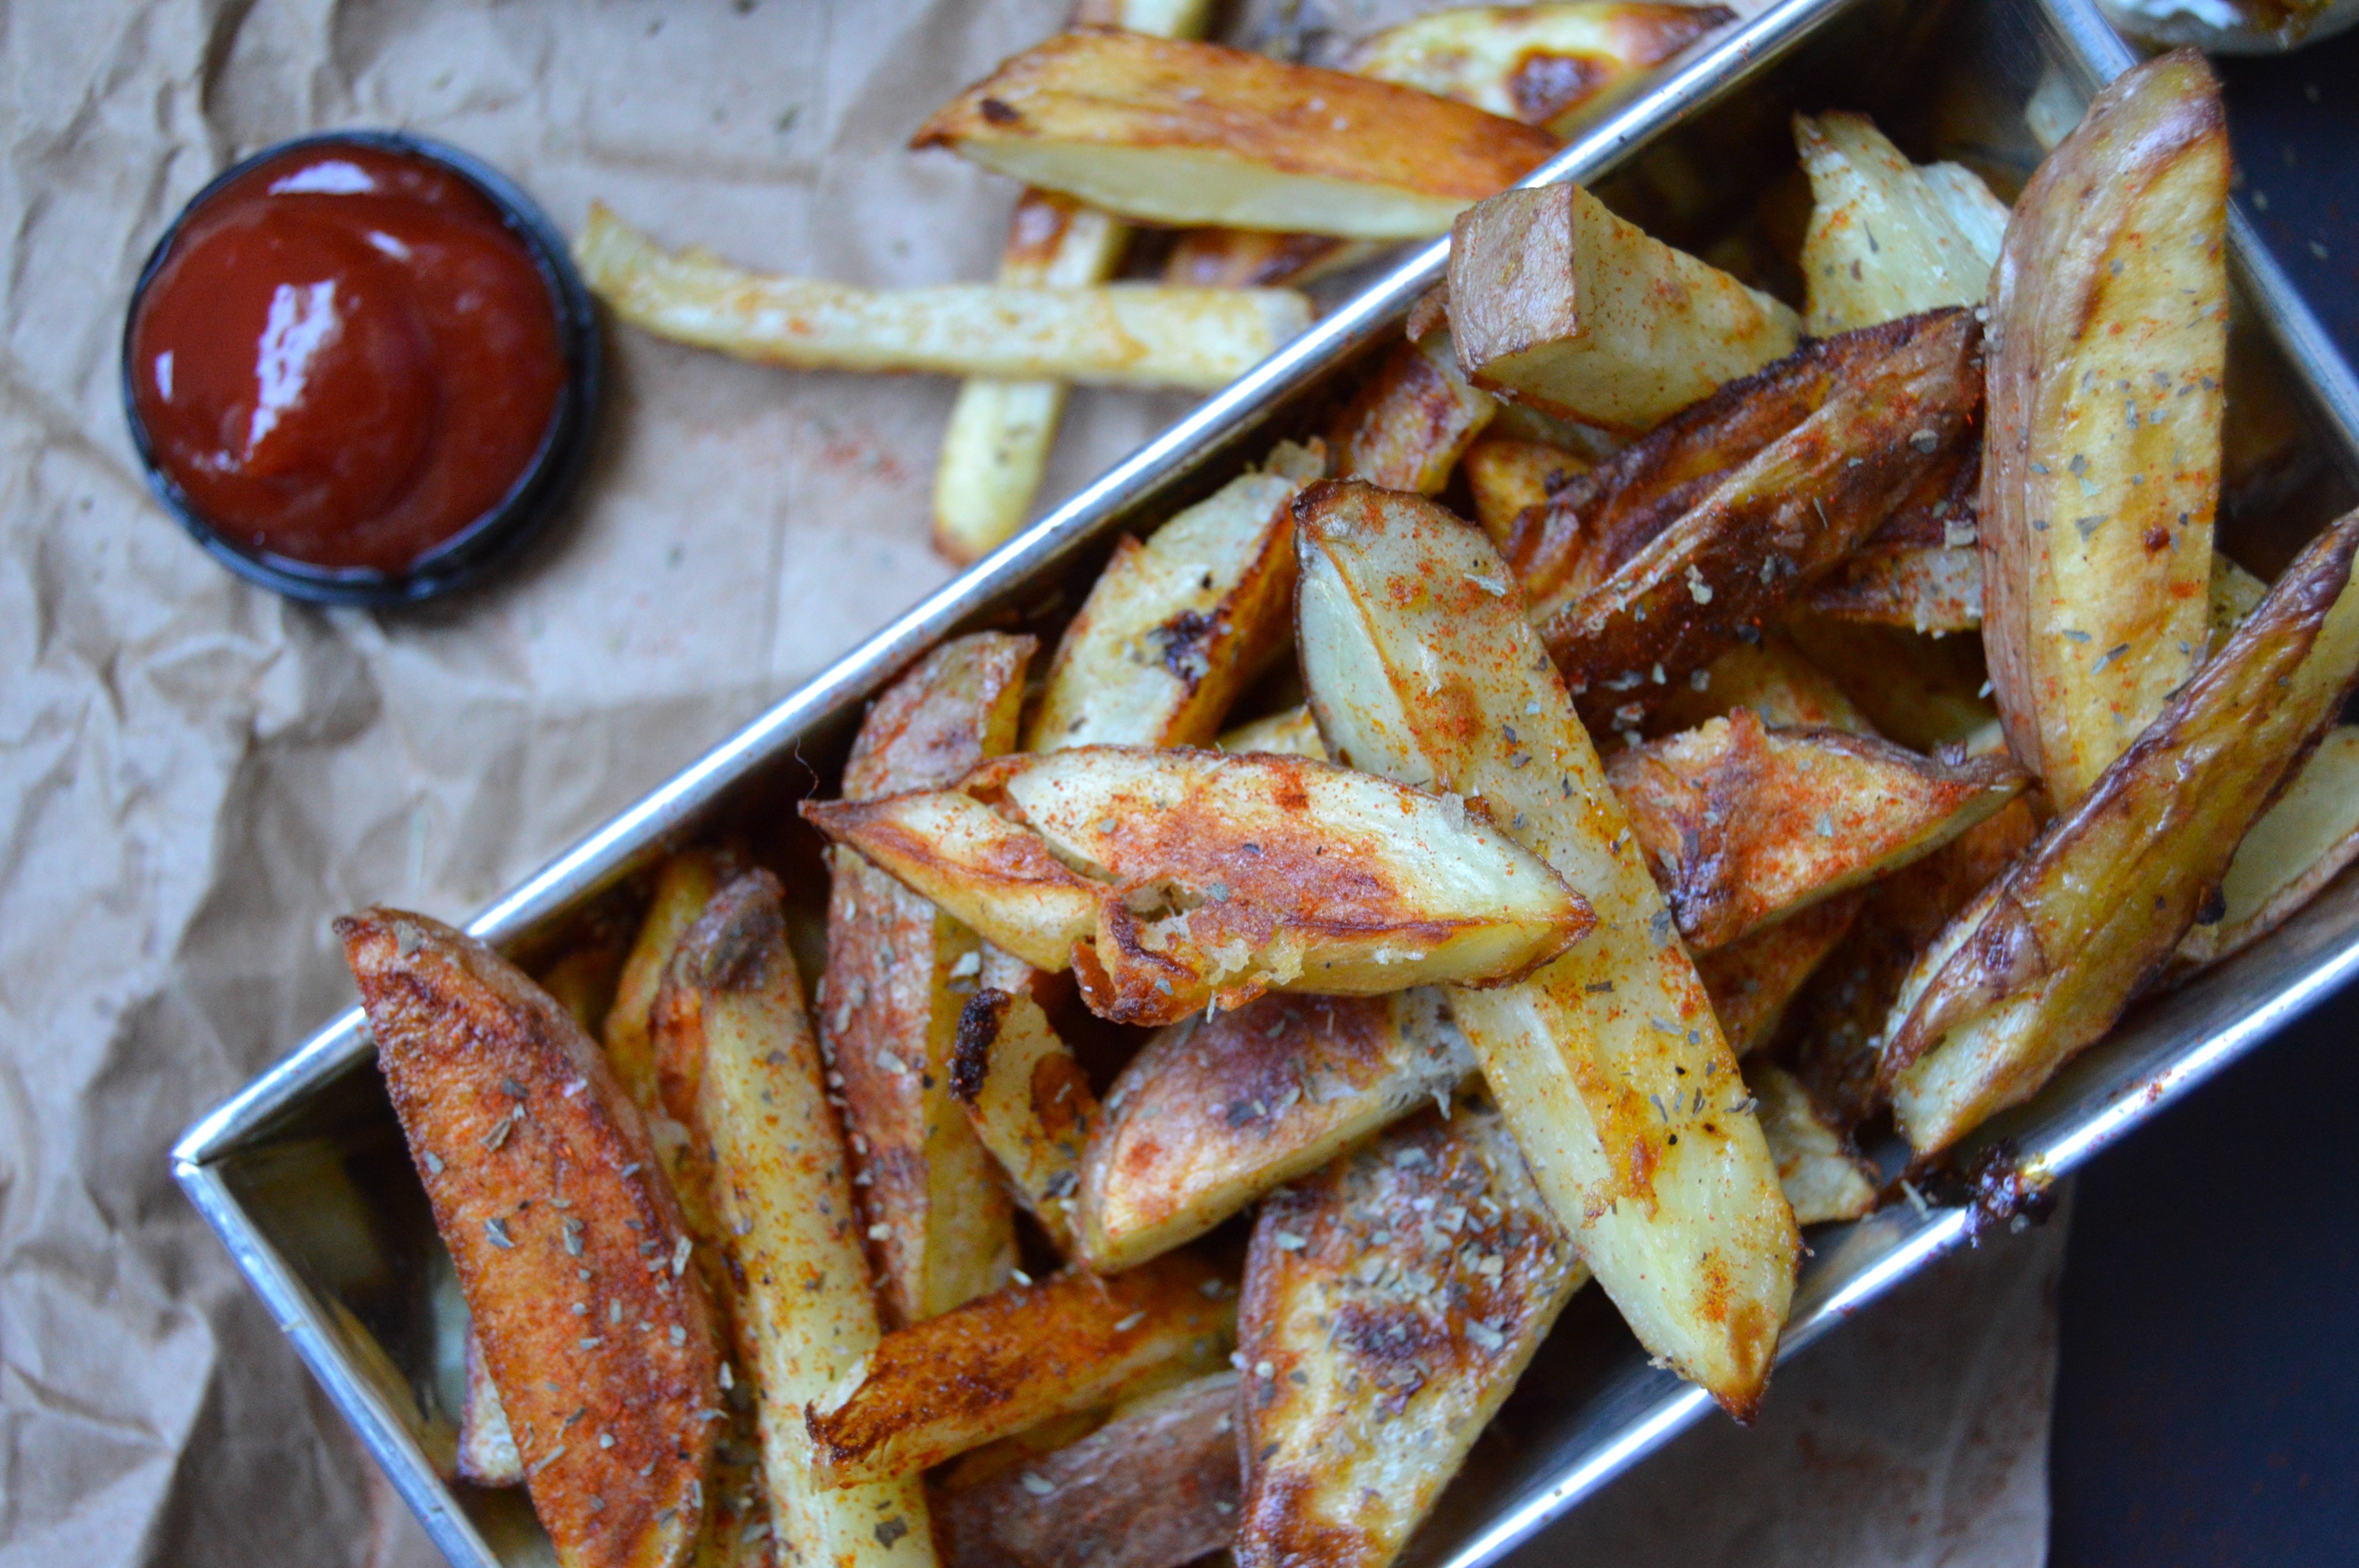 Baked red potato french fries